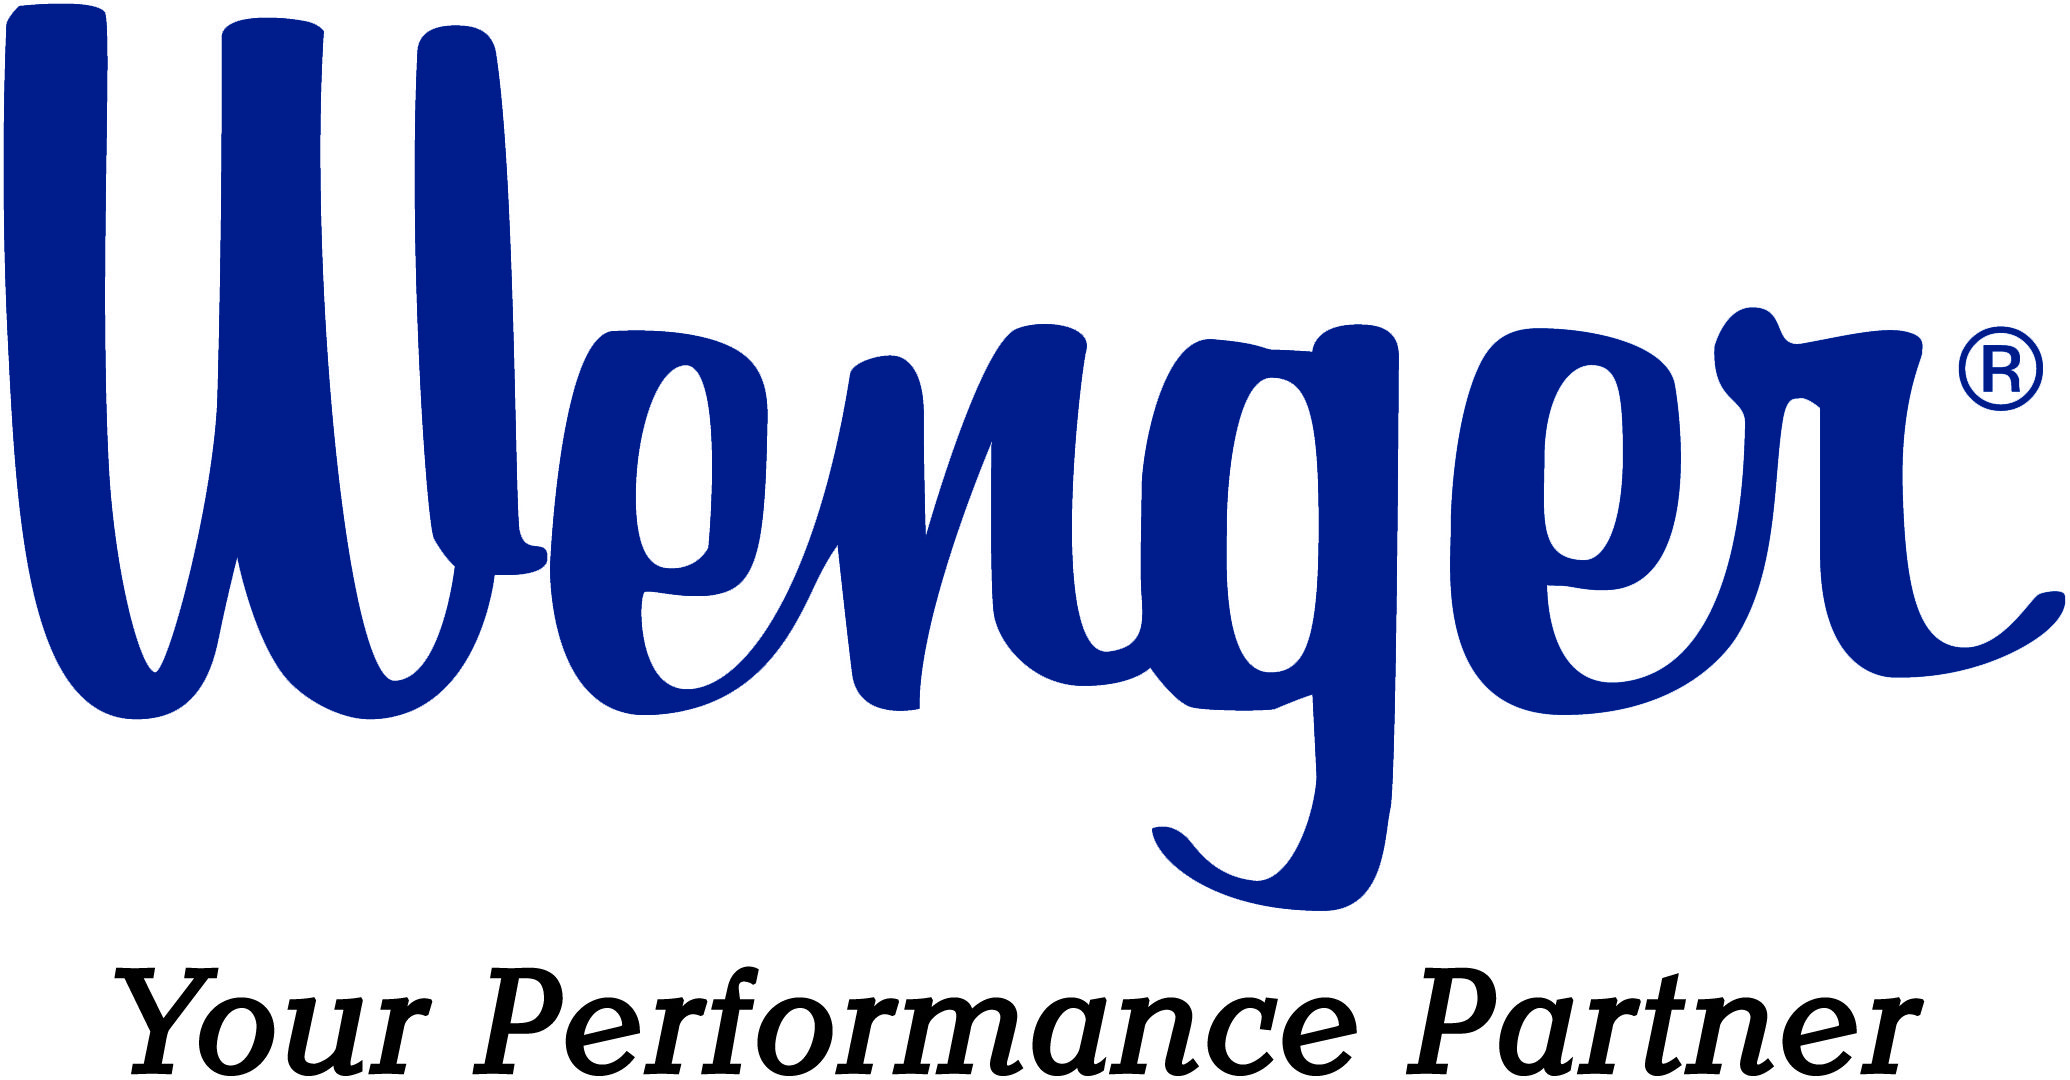 Wenger logo with tagline, "Your Performance Partner"